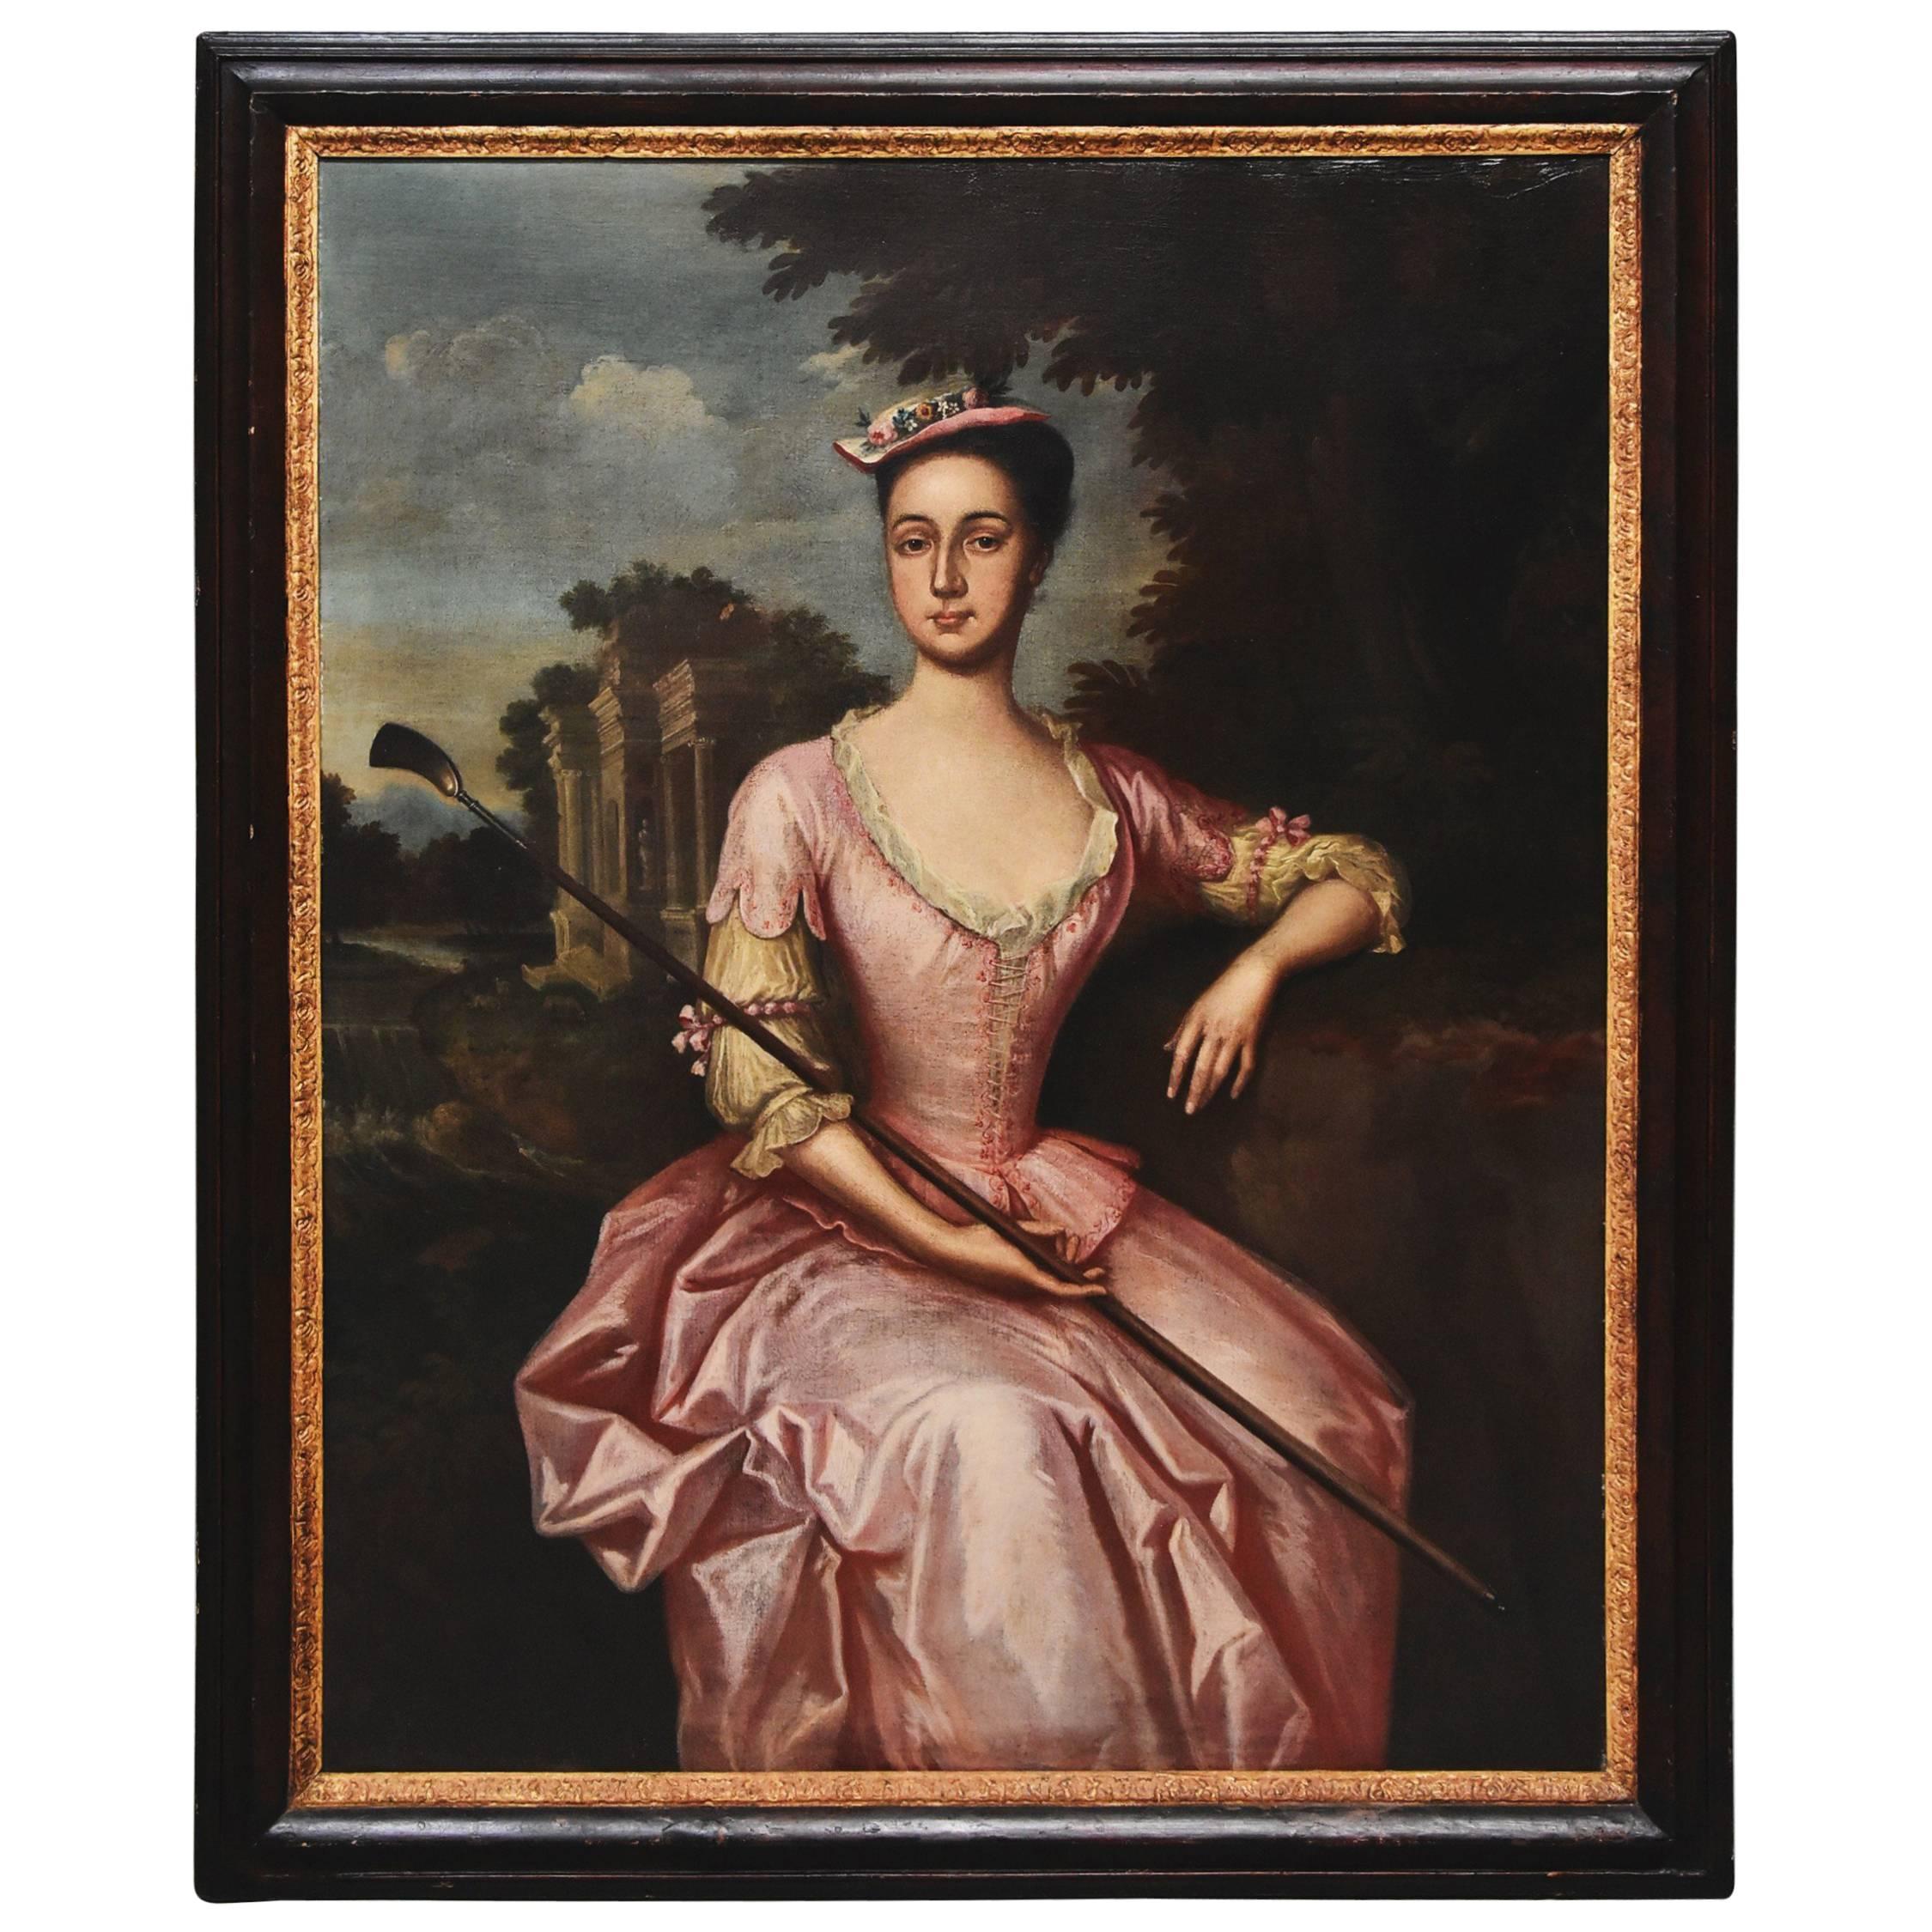 Large 18th Century Portrait of a Young Woman, Believed to Be Mary Yeats